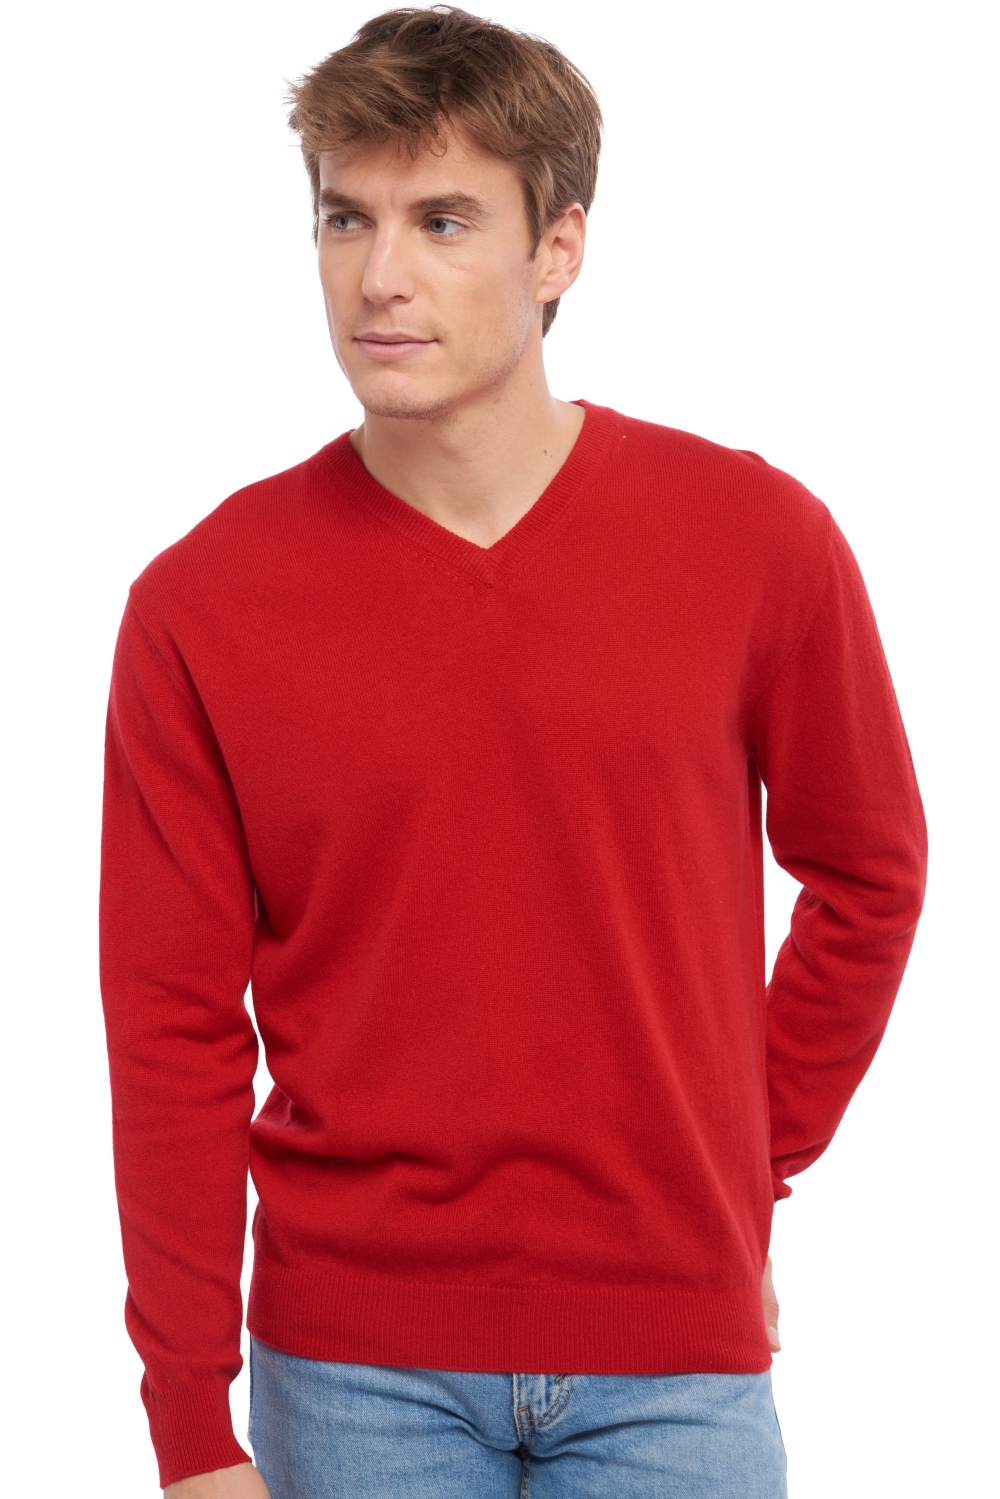 Cashmere men timeless classics gaspard blood red xs